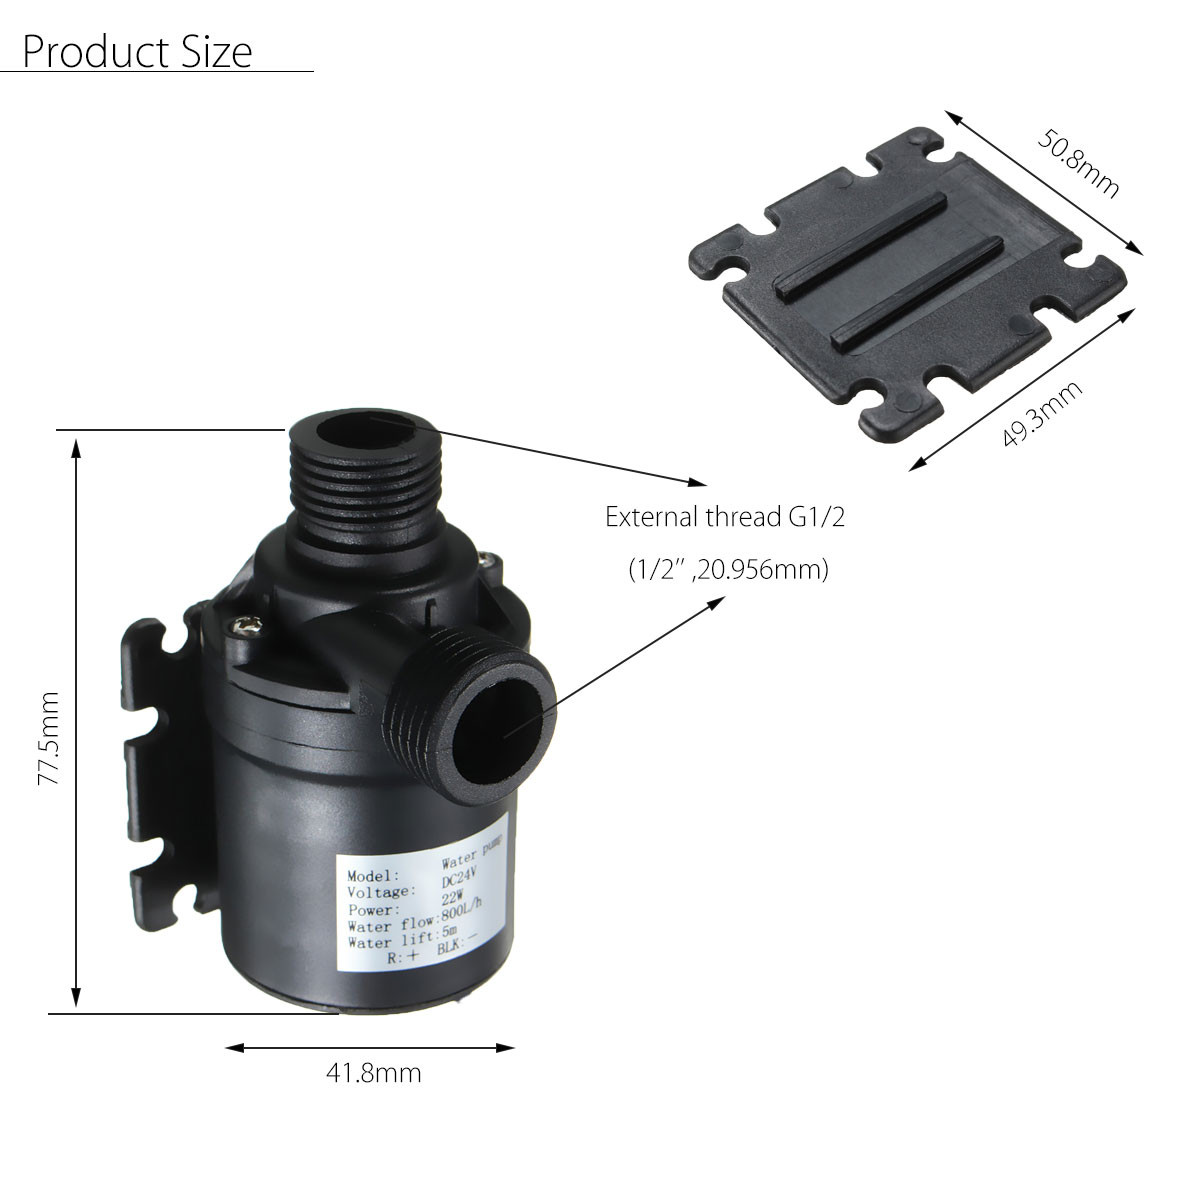 DC-24V-800LH-19W-5m-Lift-Mini-Quiet-Brushless-Motor-Submersible-Water-Pump-With-4mm-Threaded-Port-1100573-1